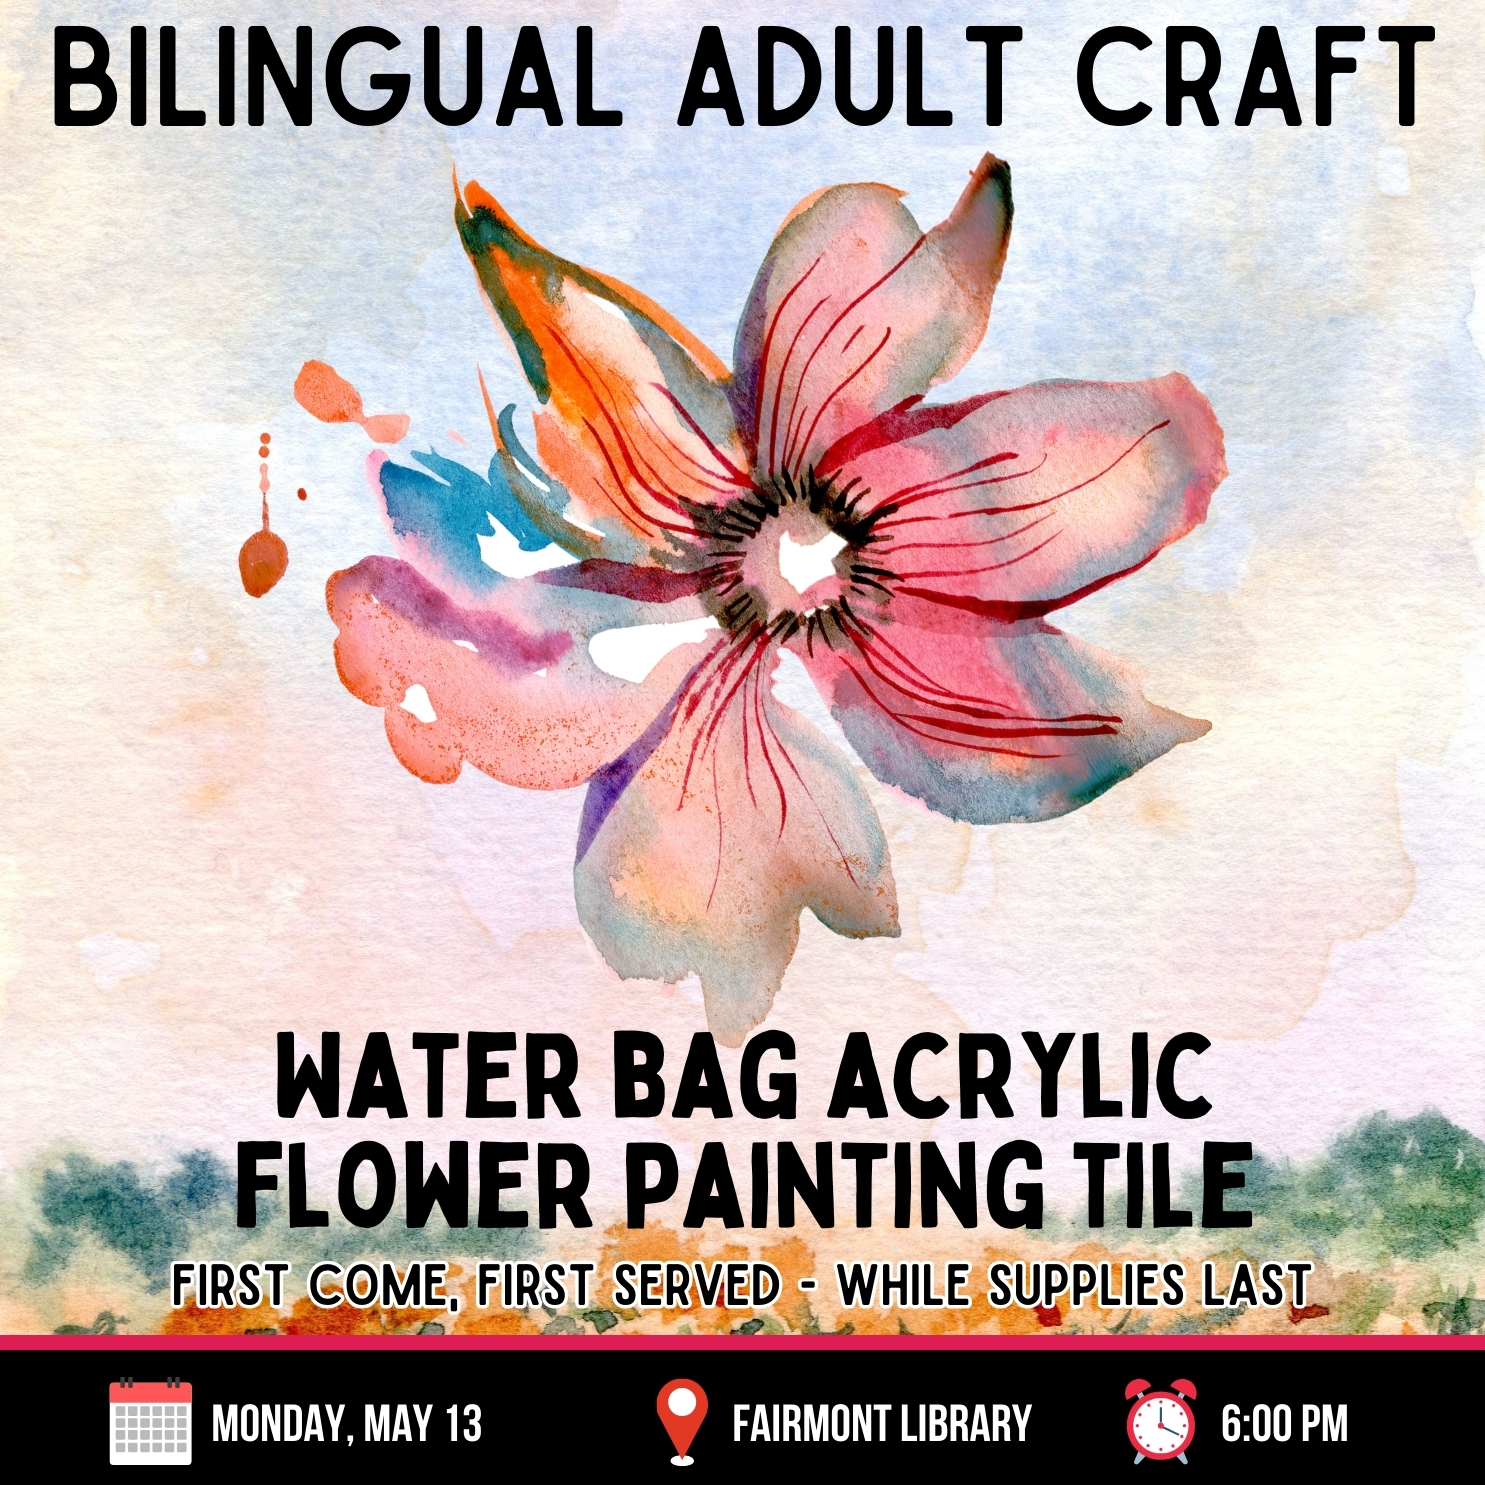 FAIRMONT: Bilingual Adult Craft - Water Bag Acrylic Flower Painting